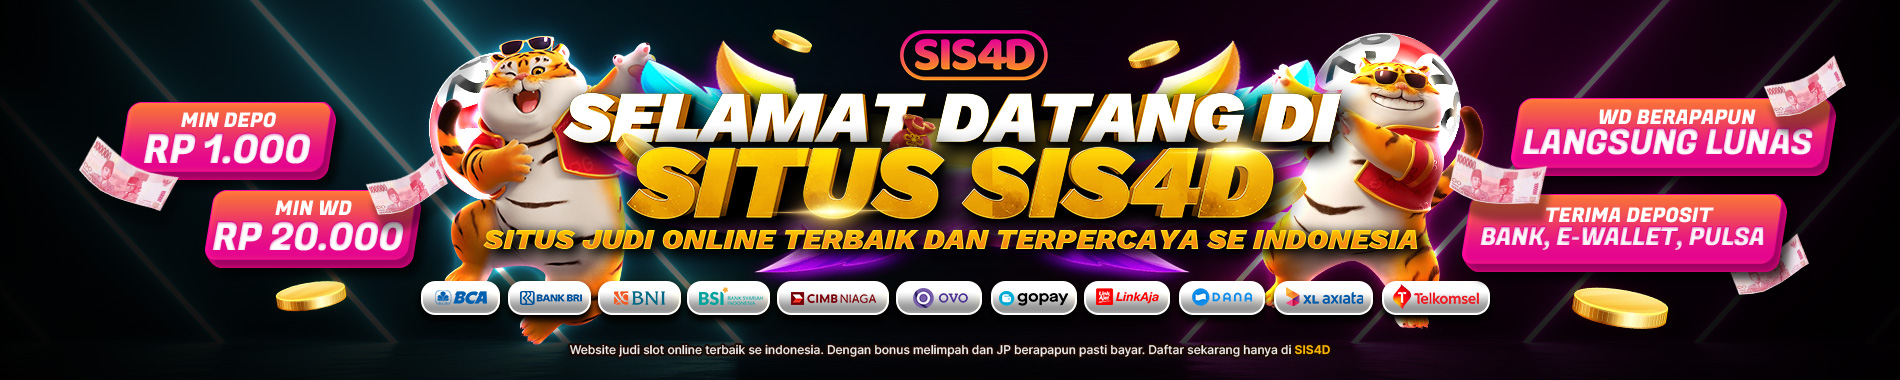 Welcome to Sis4d